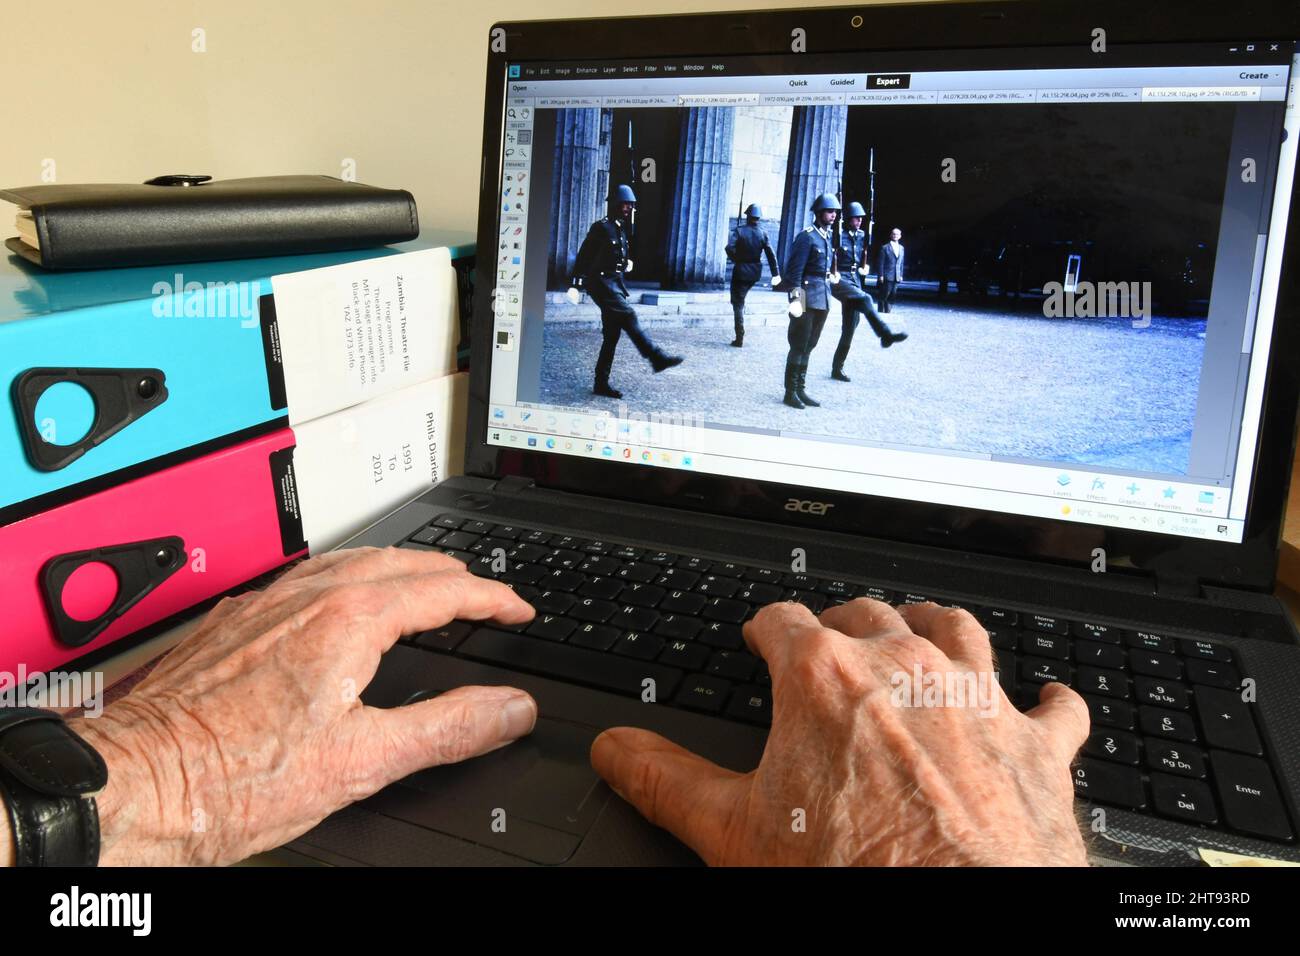 Old Hands at a computer keyboard finding pictures to trigger pleasant memories as one gets older. East Berlin was an interesting and thought provoking Stock Photo